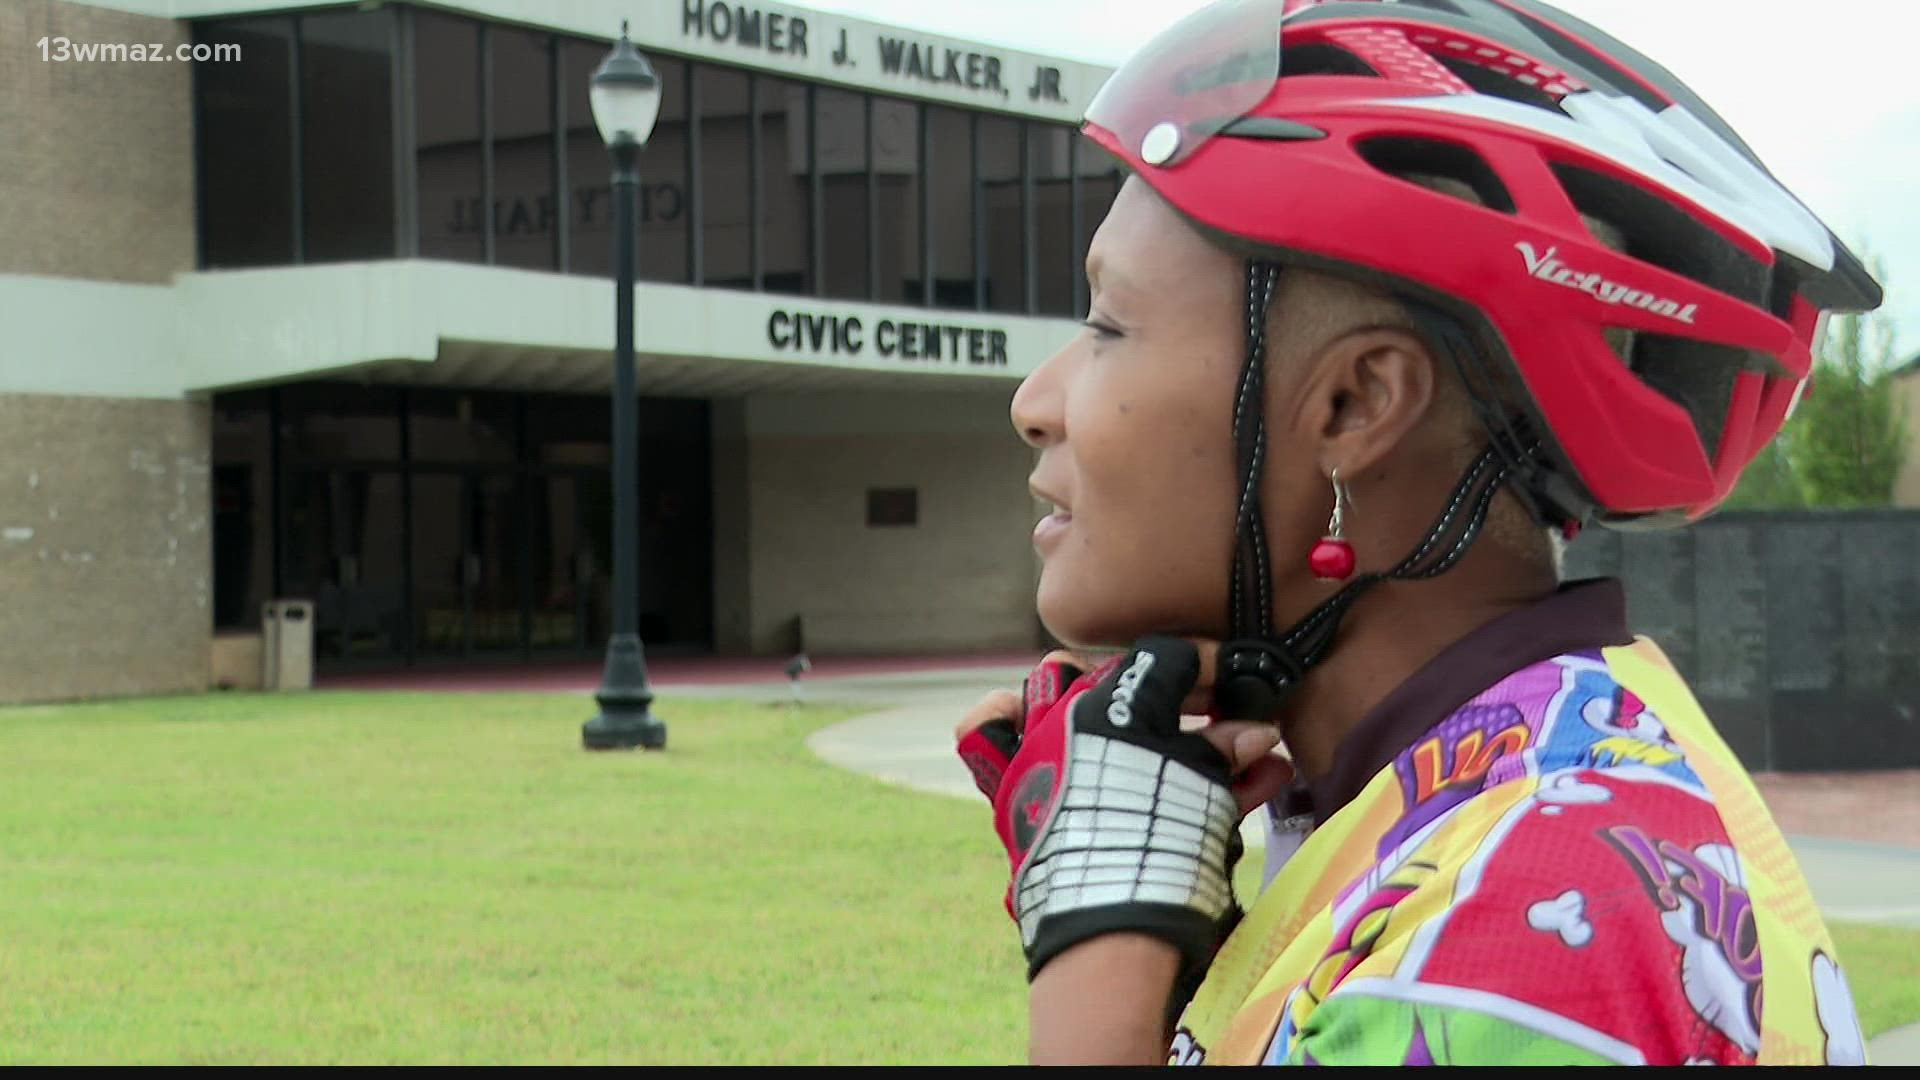 She says it's important for kids to learn safe biking skills before they go on summer break.